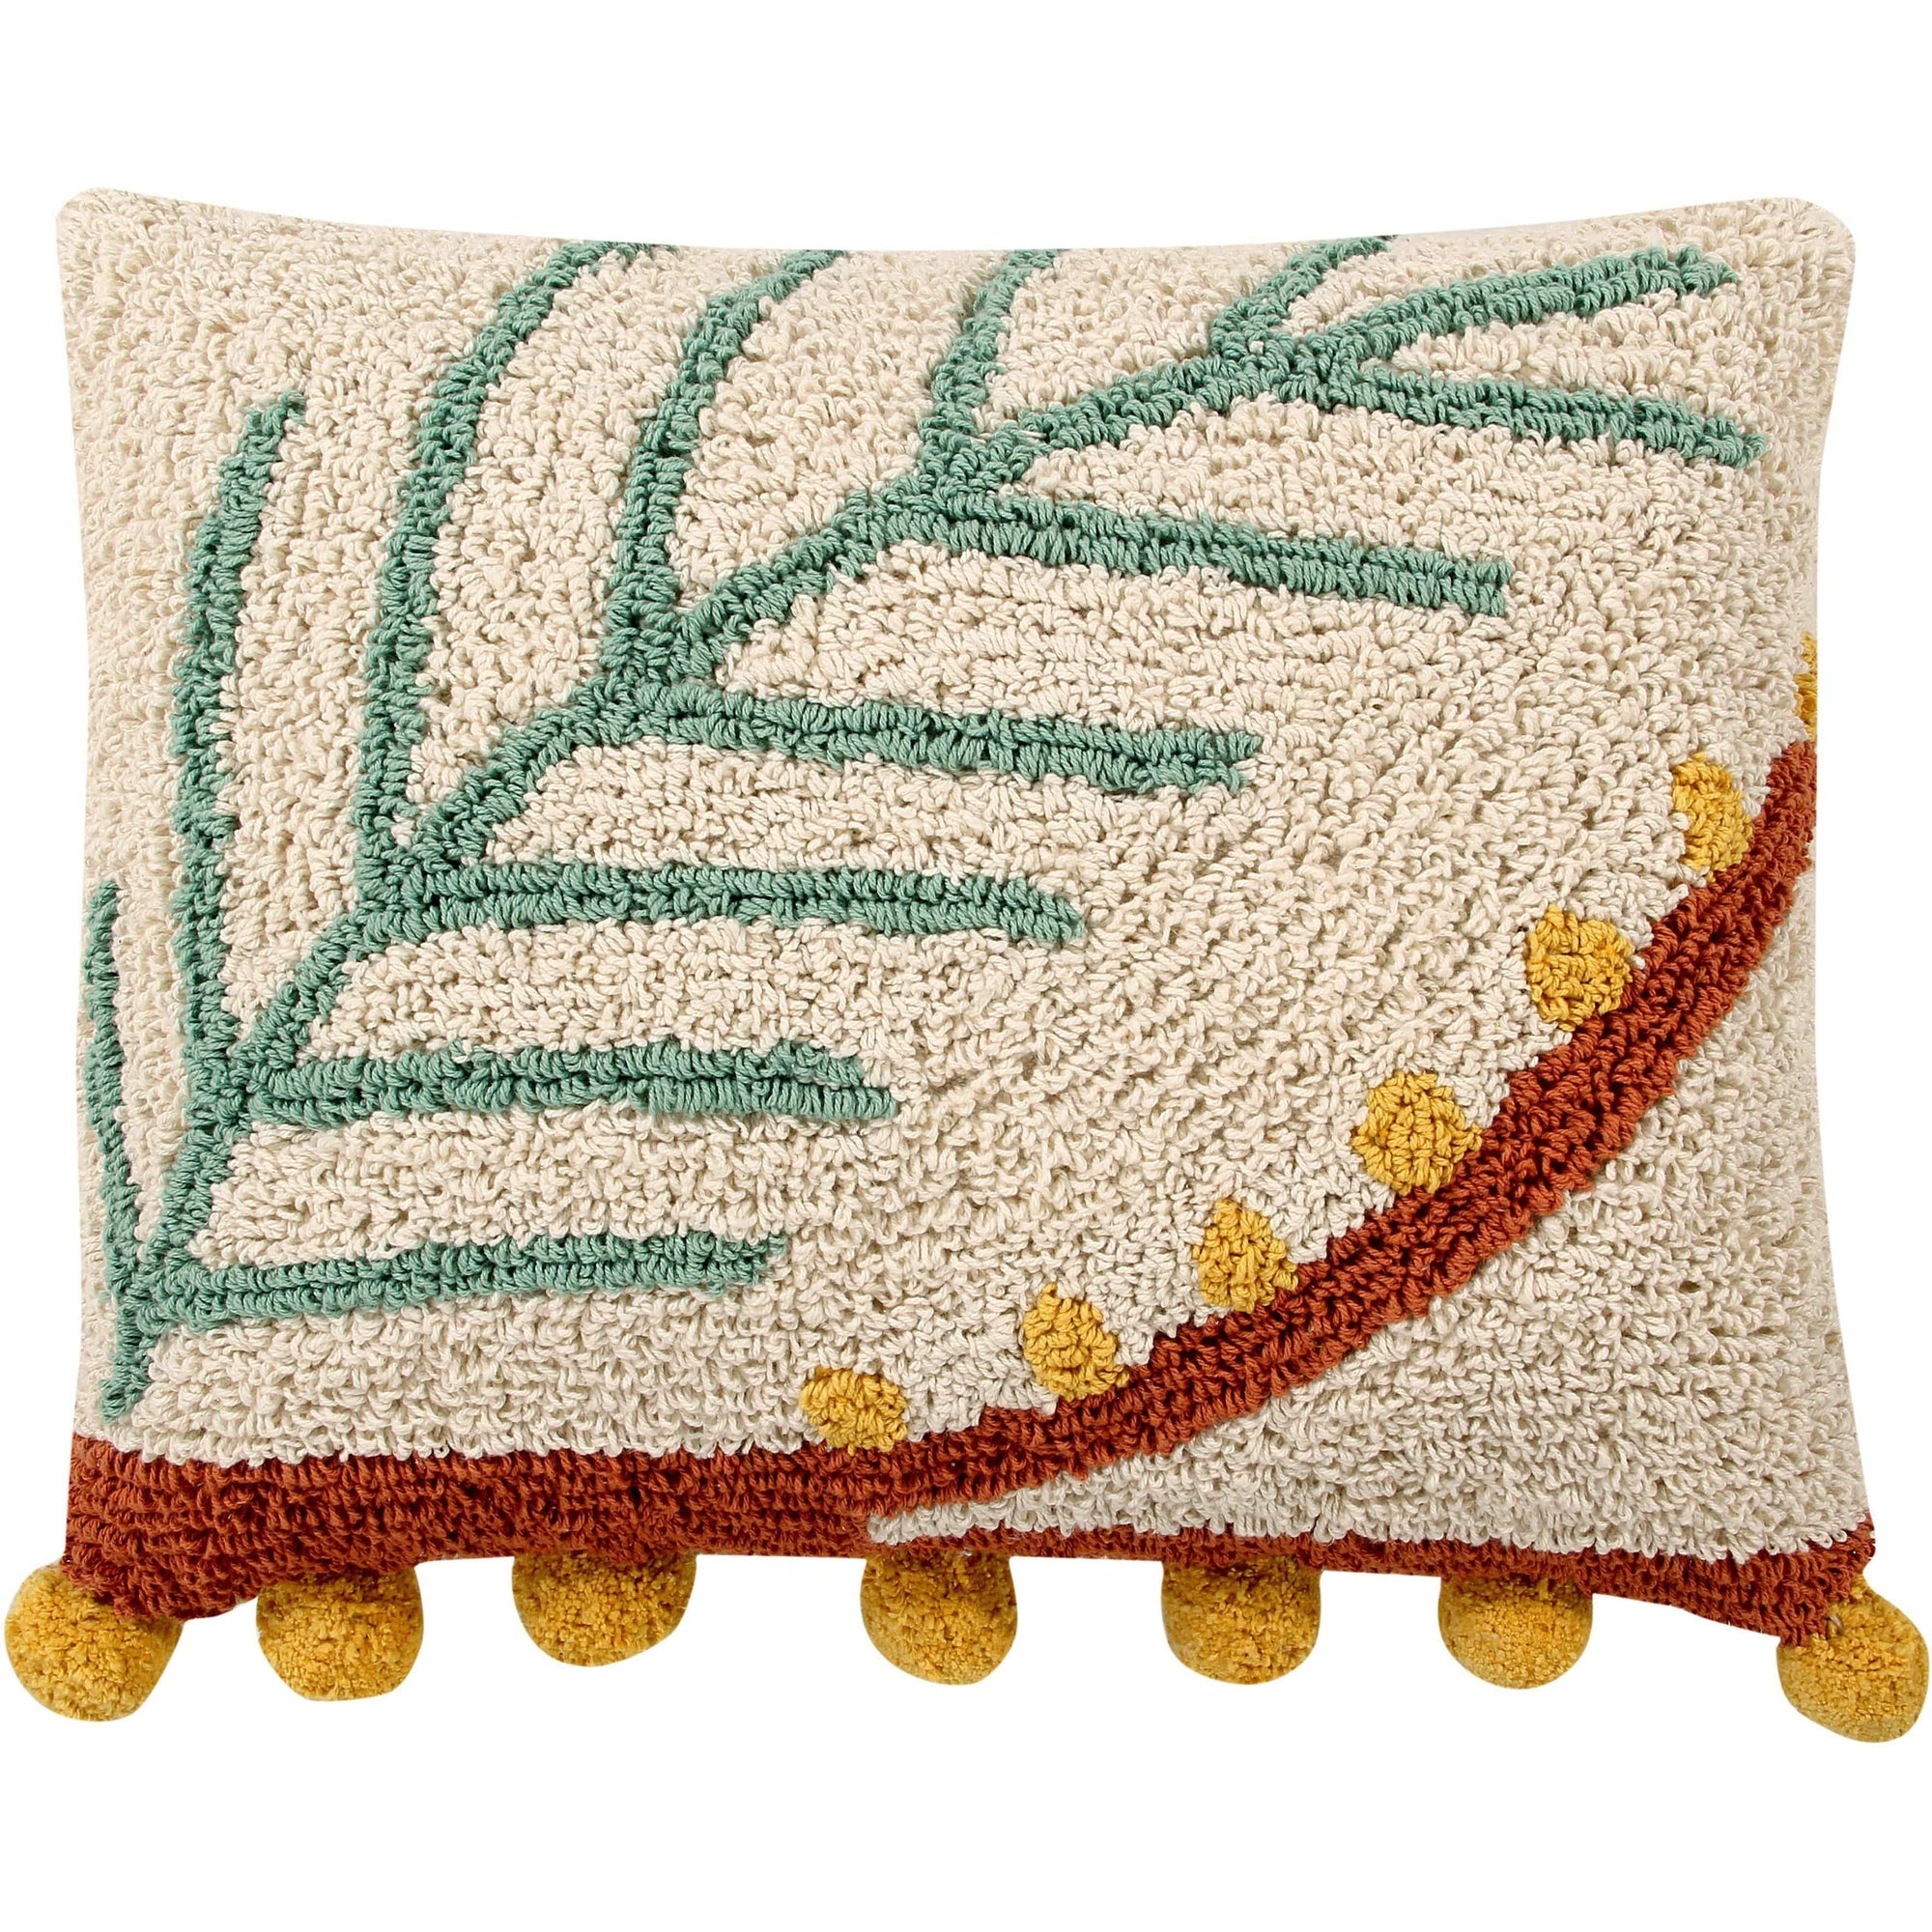 Rugs by Roo | Lorena Canals Palm Cushion-SC-PALM